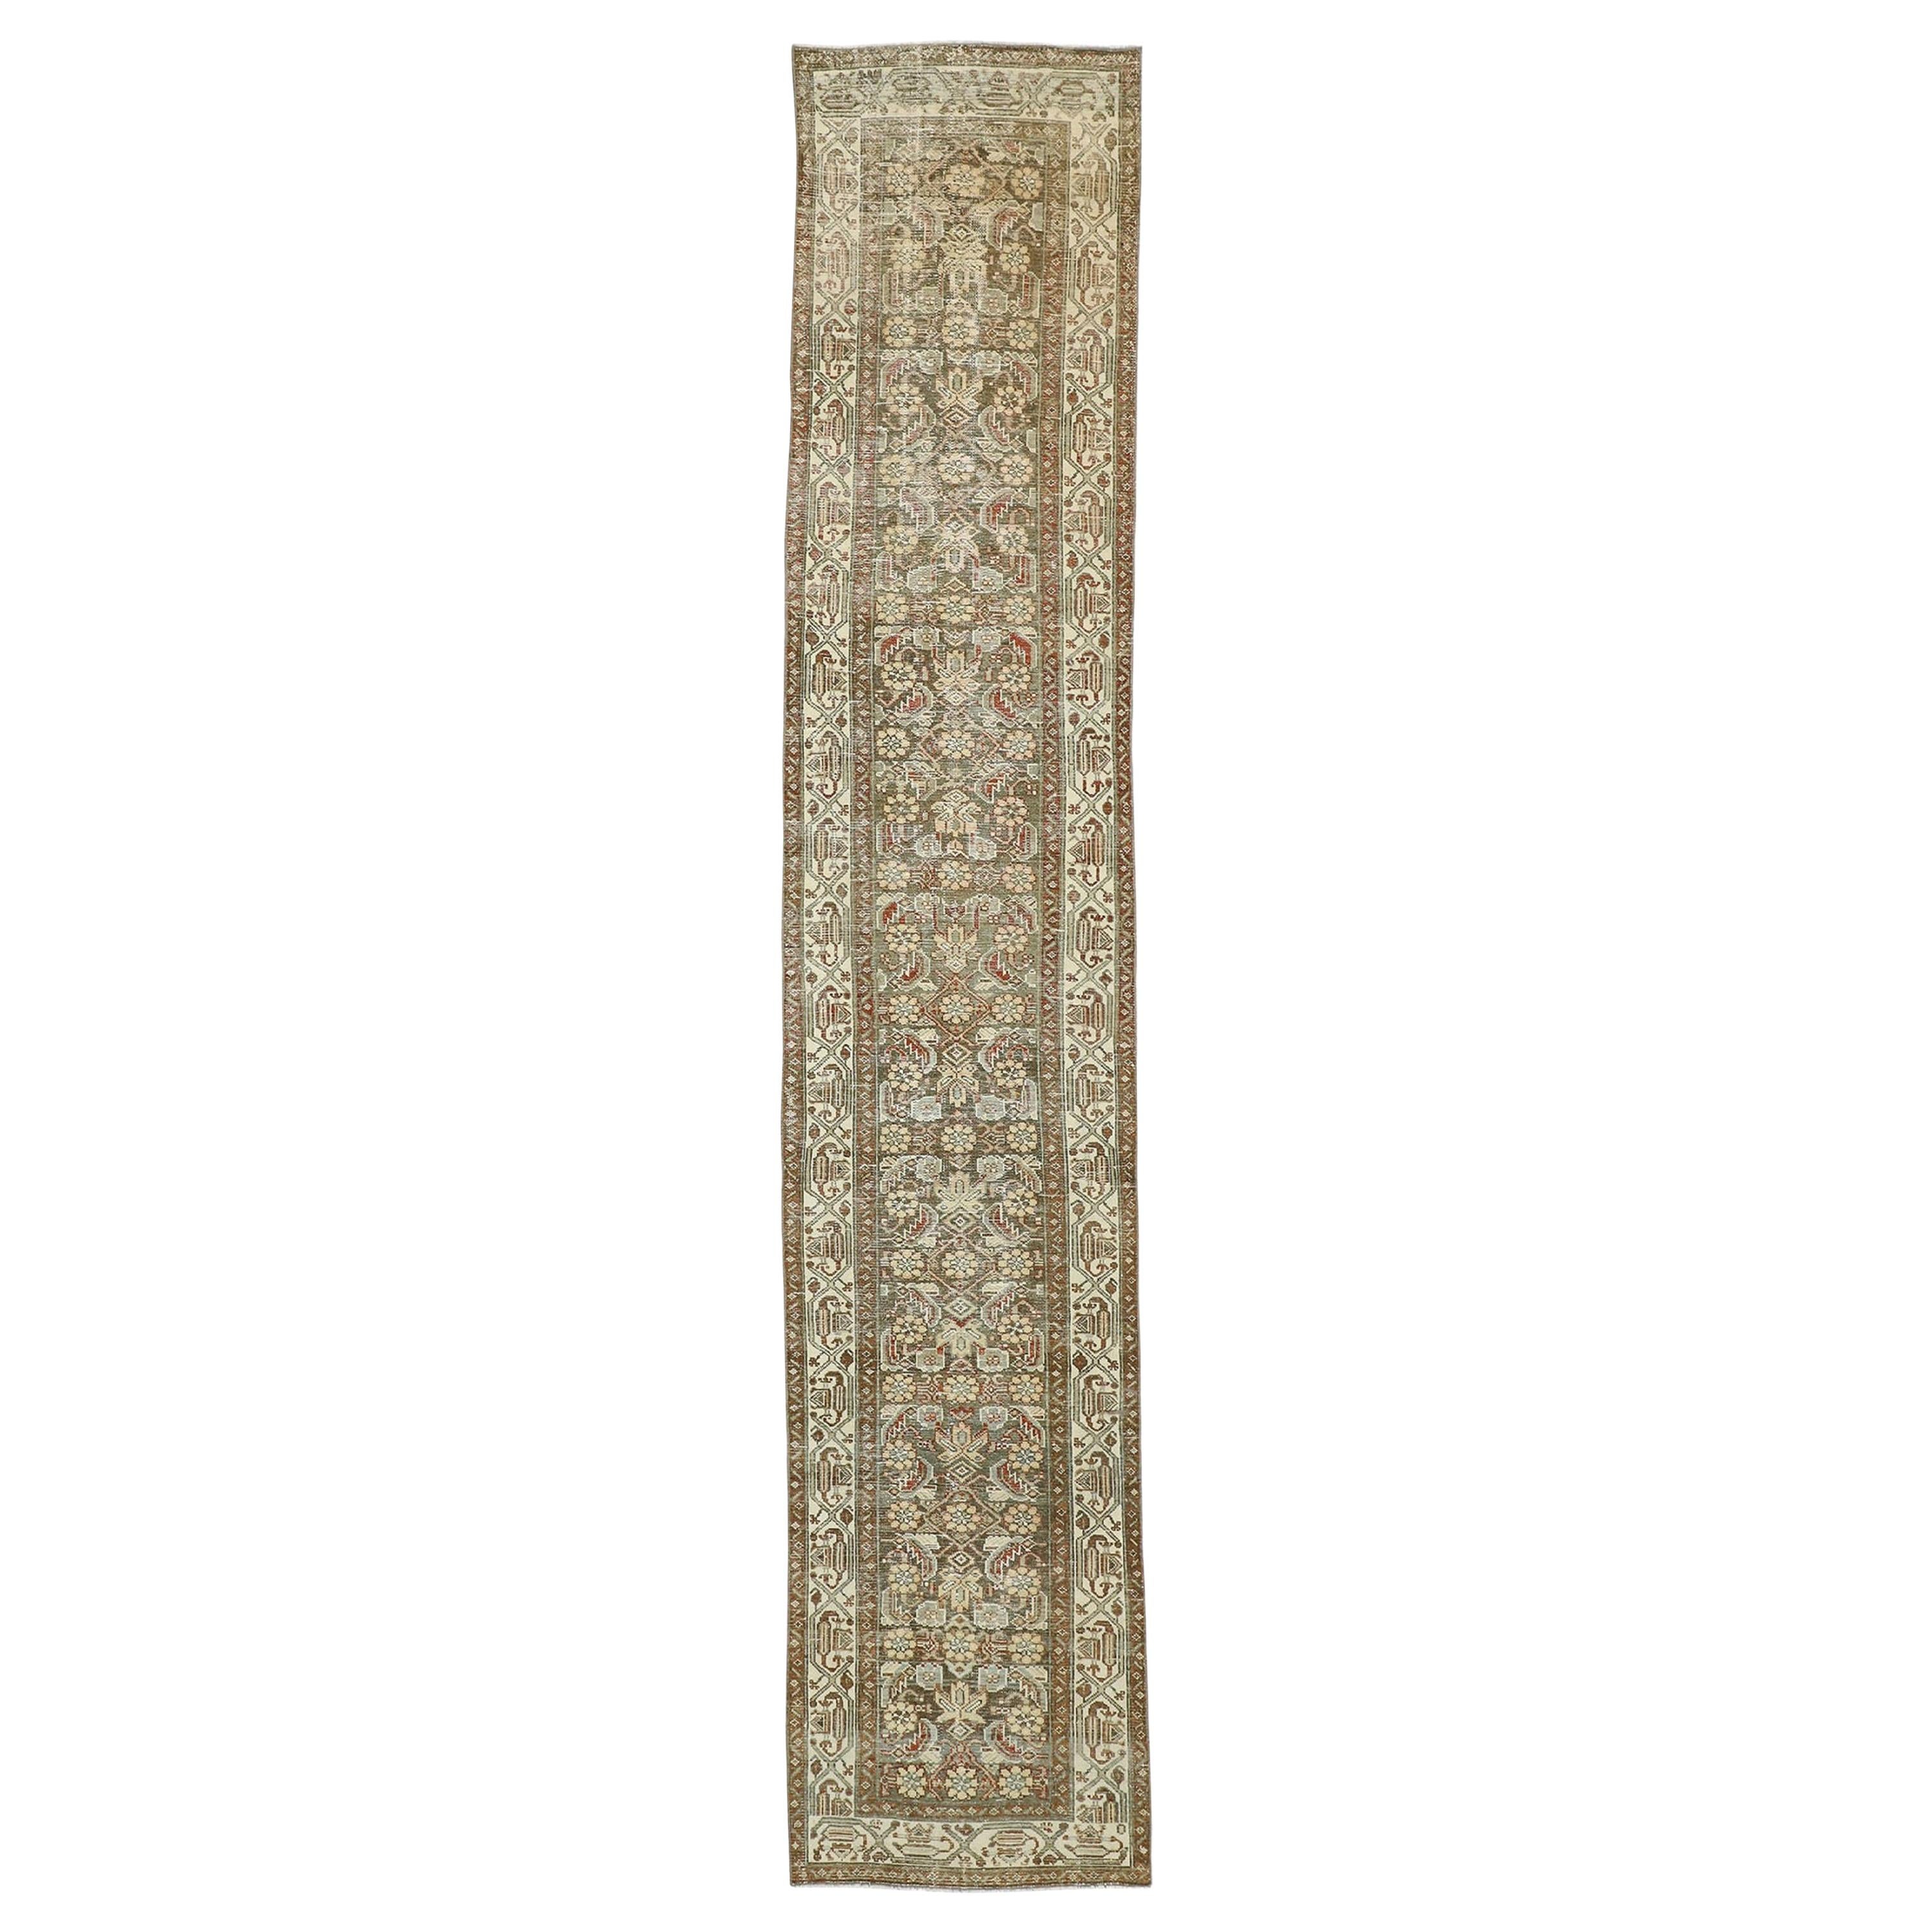 Distressed Antique Persian Malayer Design Runner with Rustic Craftsman Style For Sale